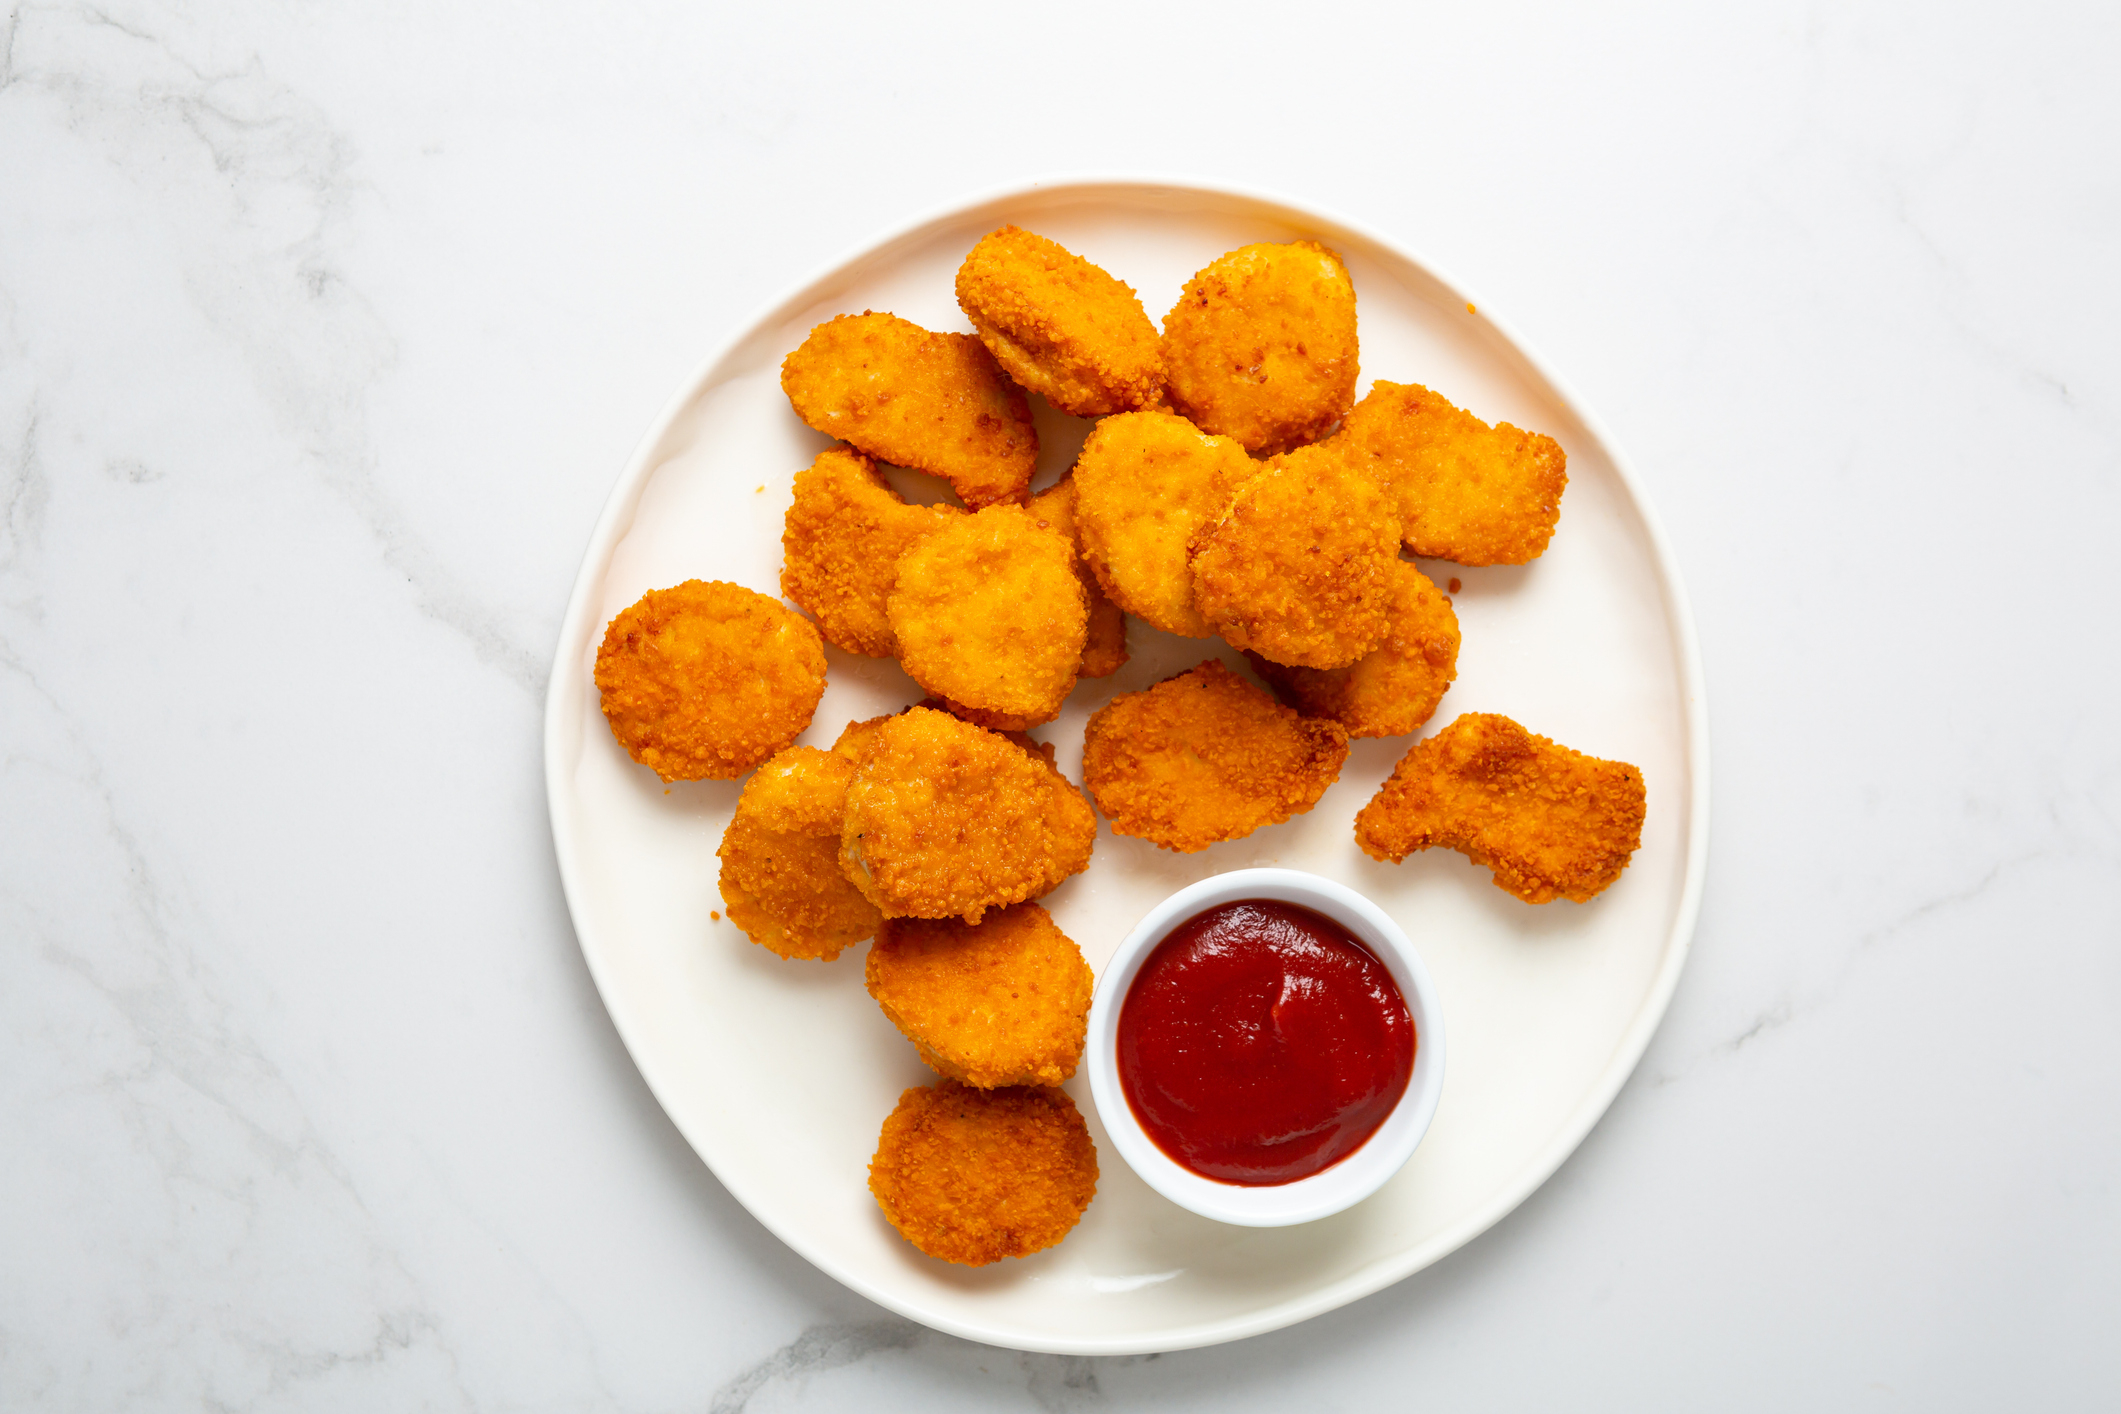 Plate of chicken nuggets with a side of ketchup